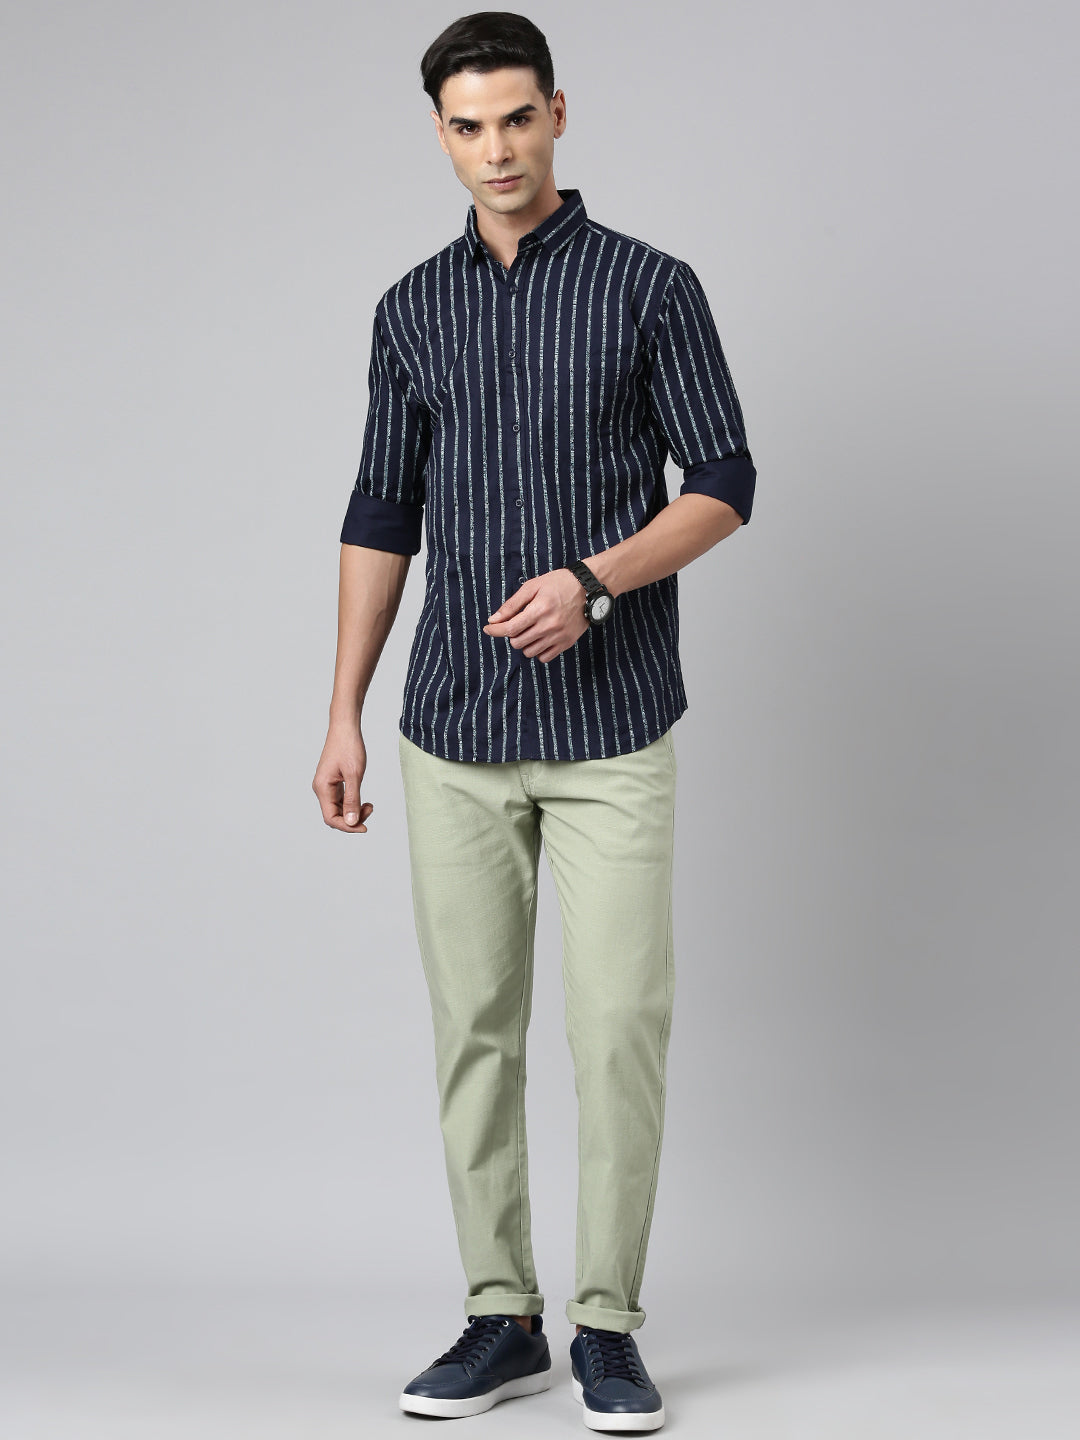 Majestic Man Casual Comfortable Slim Fit Stripped Cotton Shirt - Navy Blue